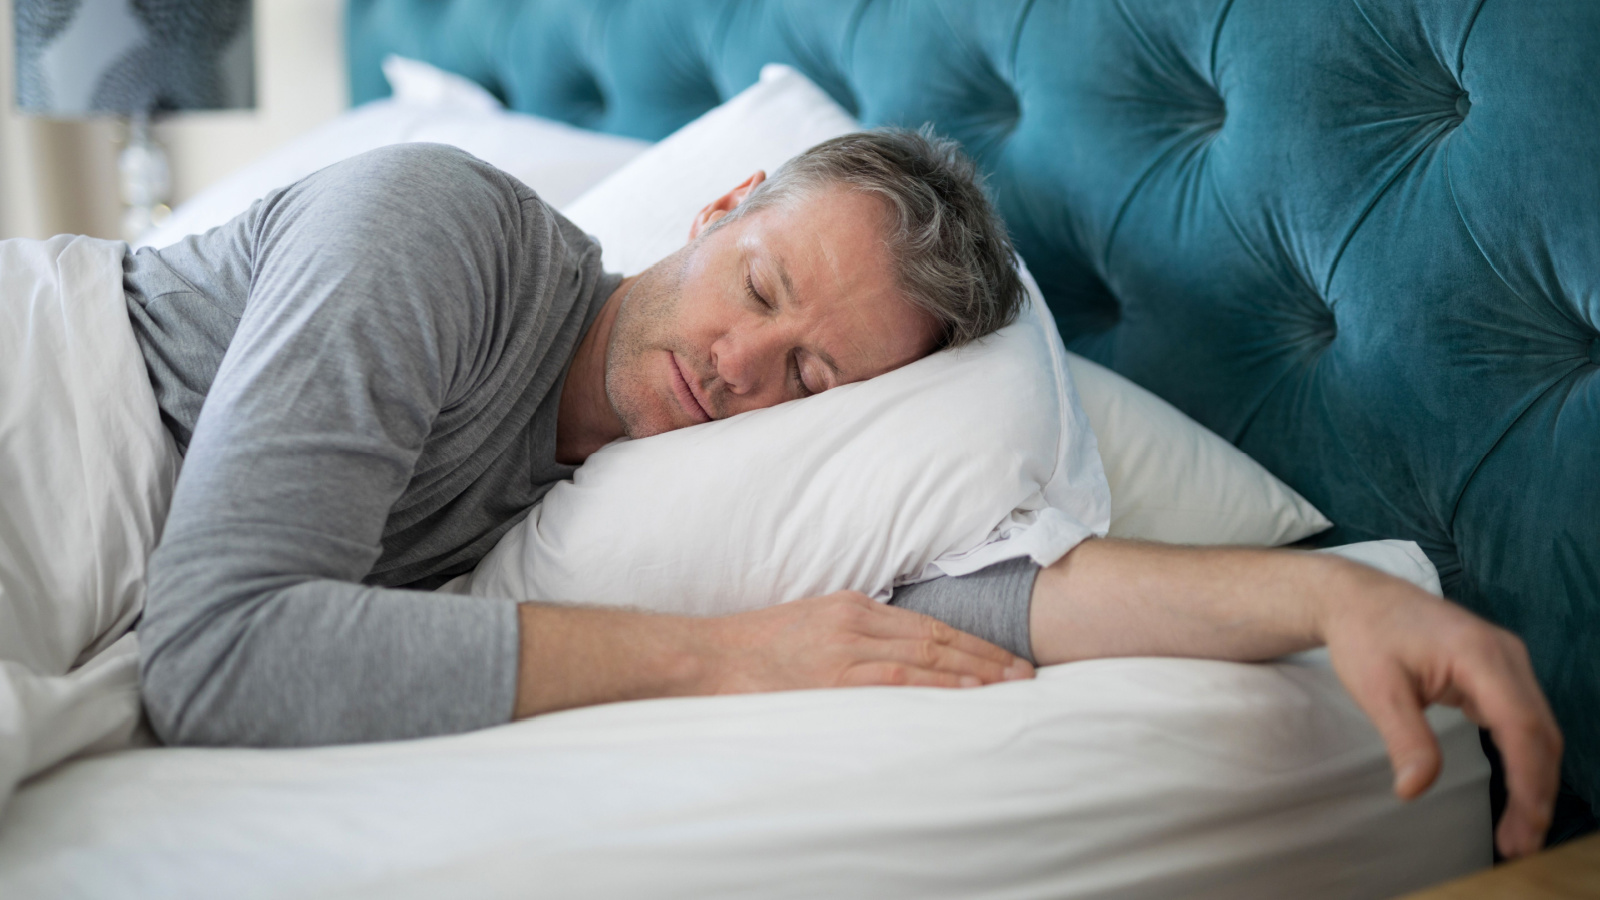 image credit: wavebreakmedia/Shutterstock <p>Snoring can become more prevalent or severe as men get older. This can be due to changes in body weight, throat muscle relaxation, or other health issues. Addressing snoring is important, as it can impact sleep quality for the individual and their partner.</p>